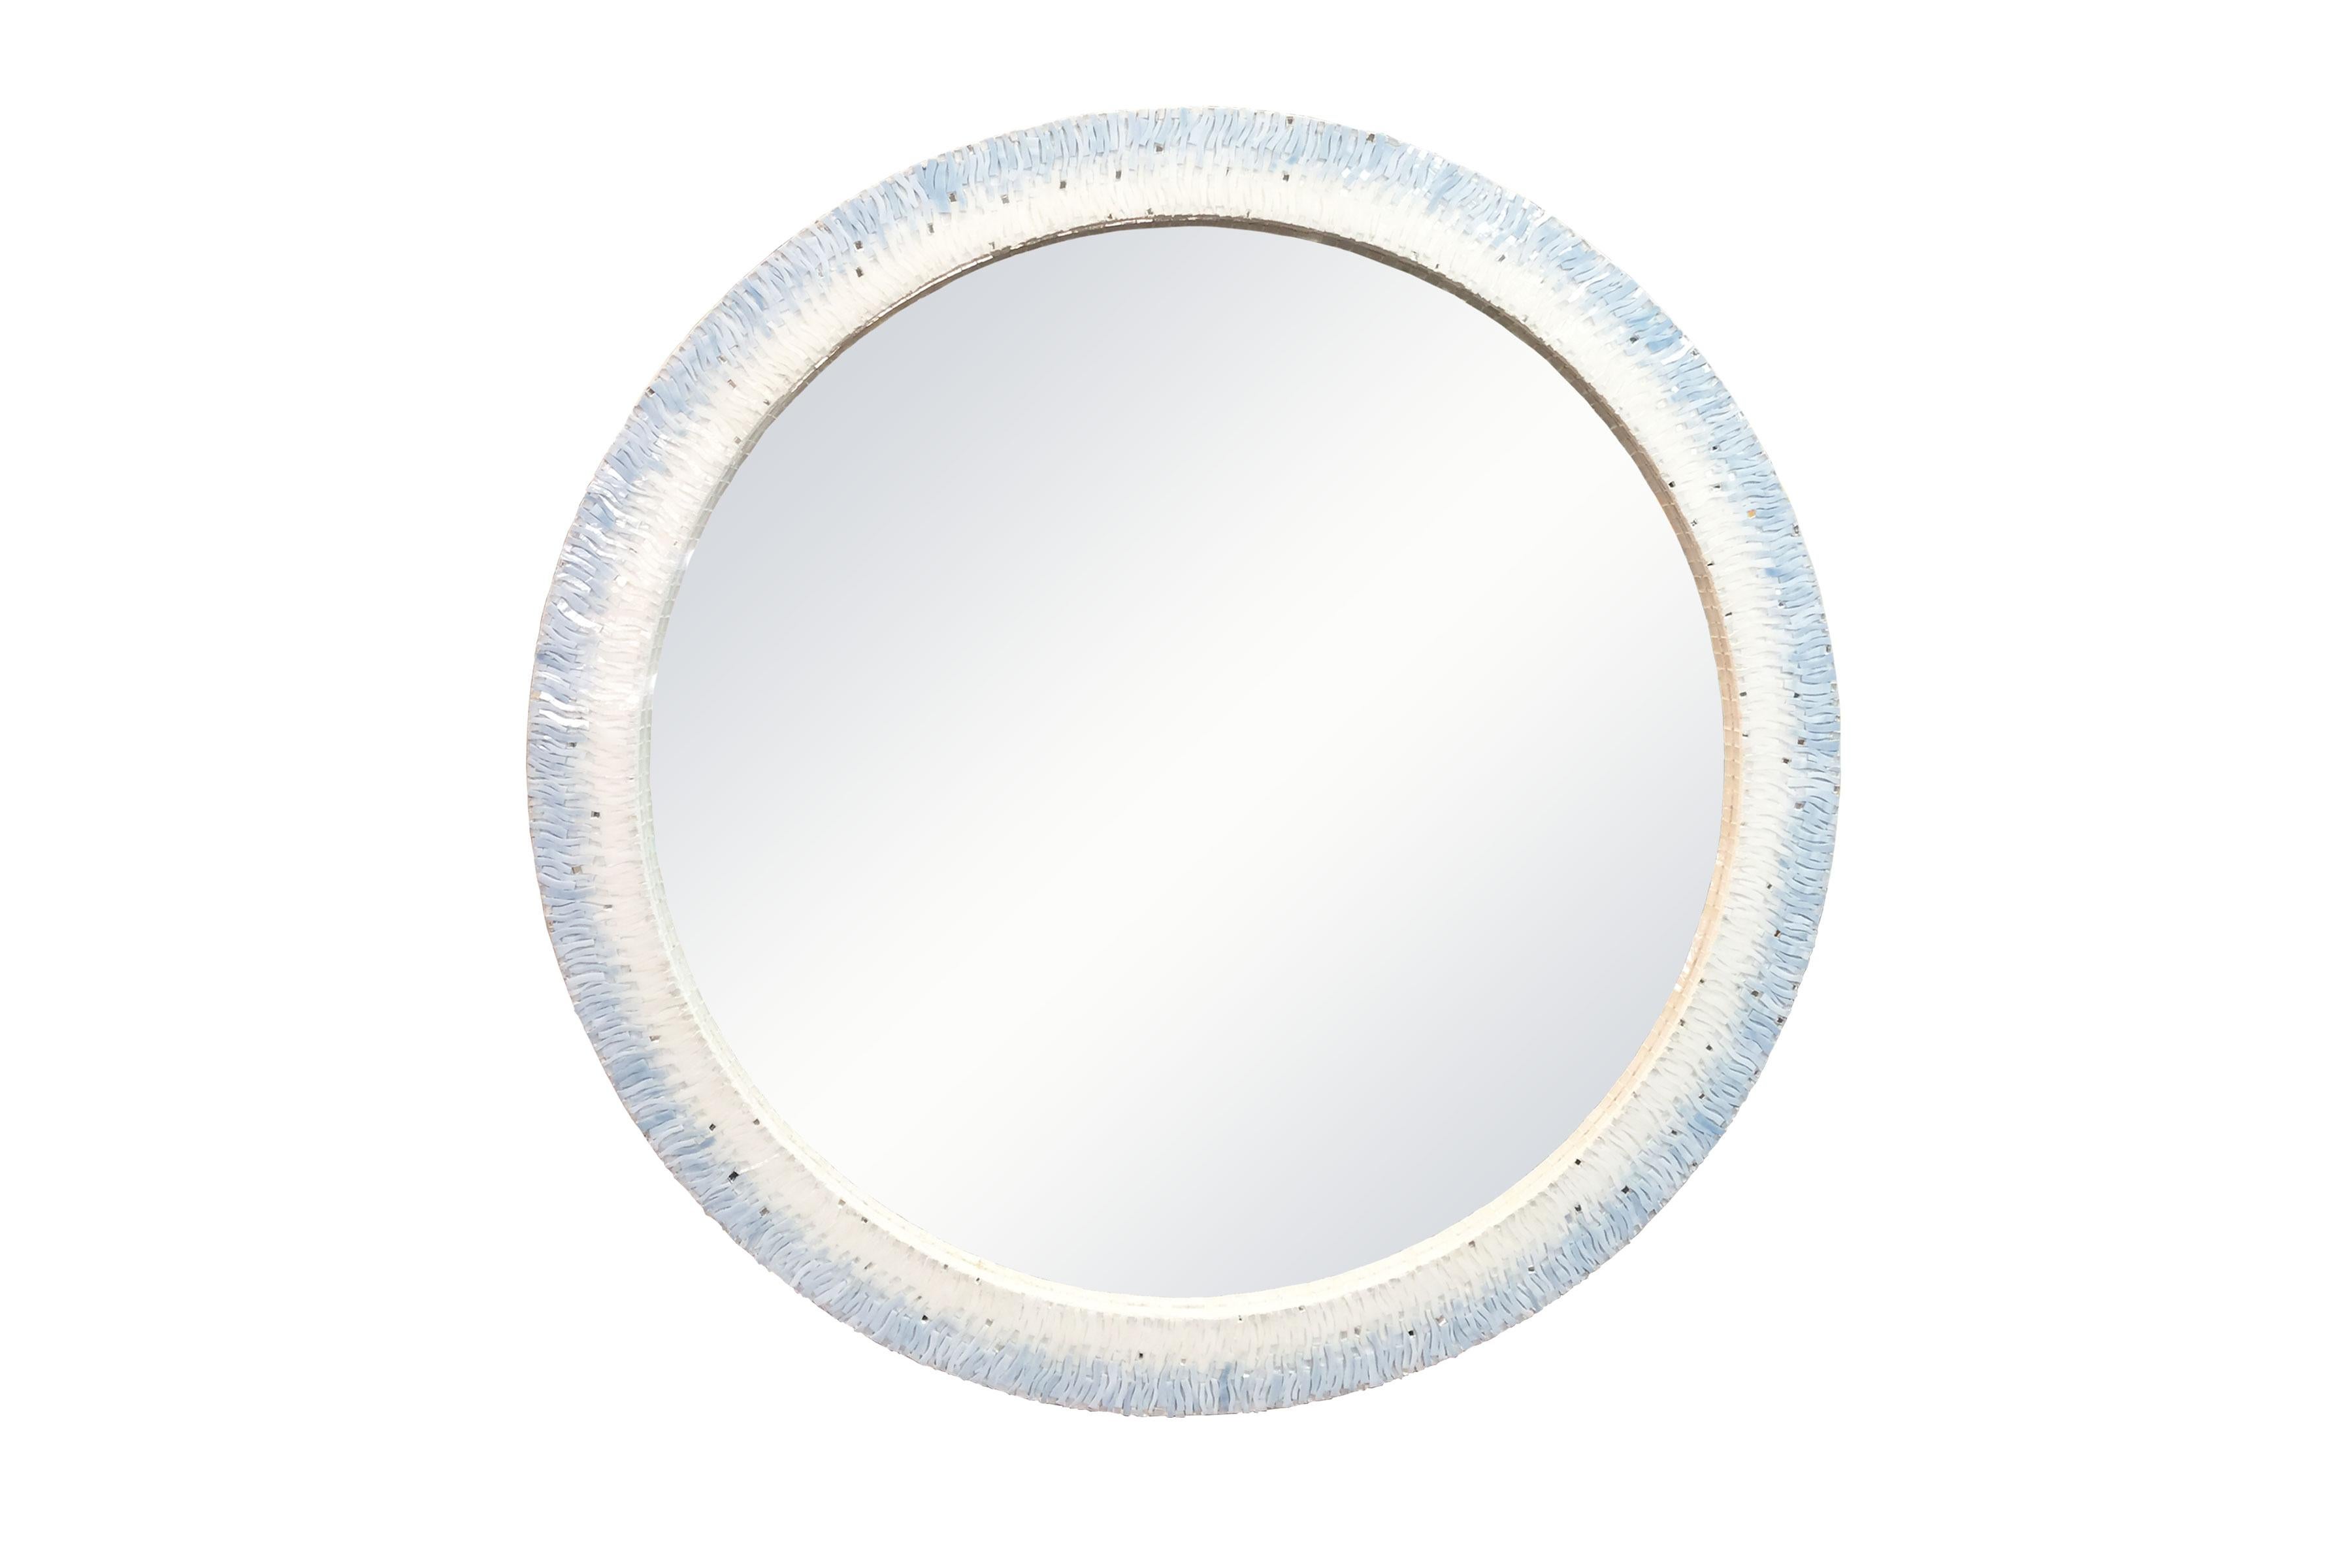 American Modern Breara Mosaic Round Mirror with White and Gray Glass by Ercole Home For Sale